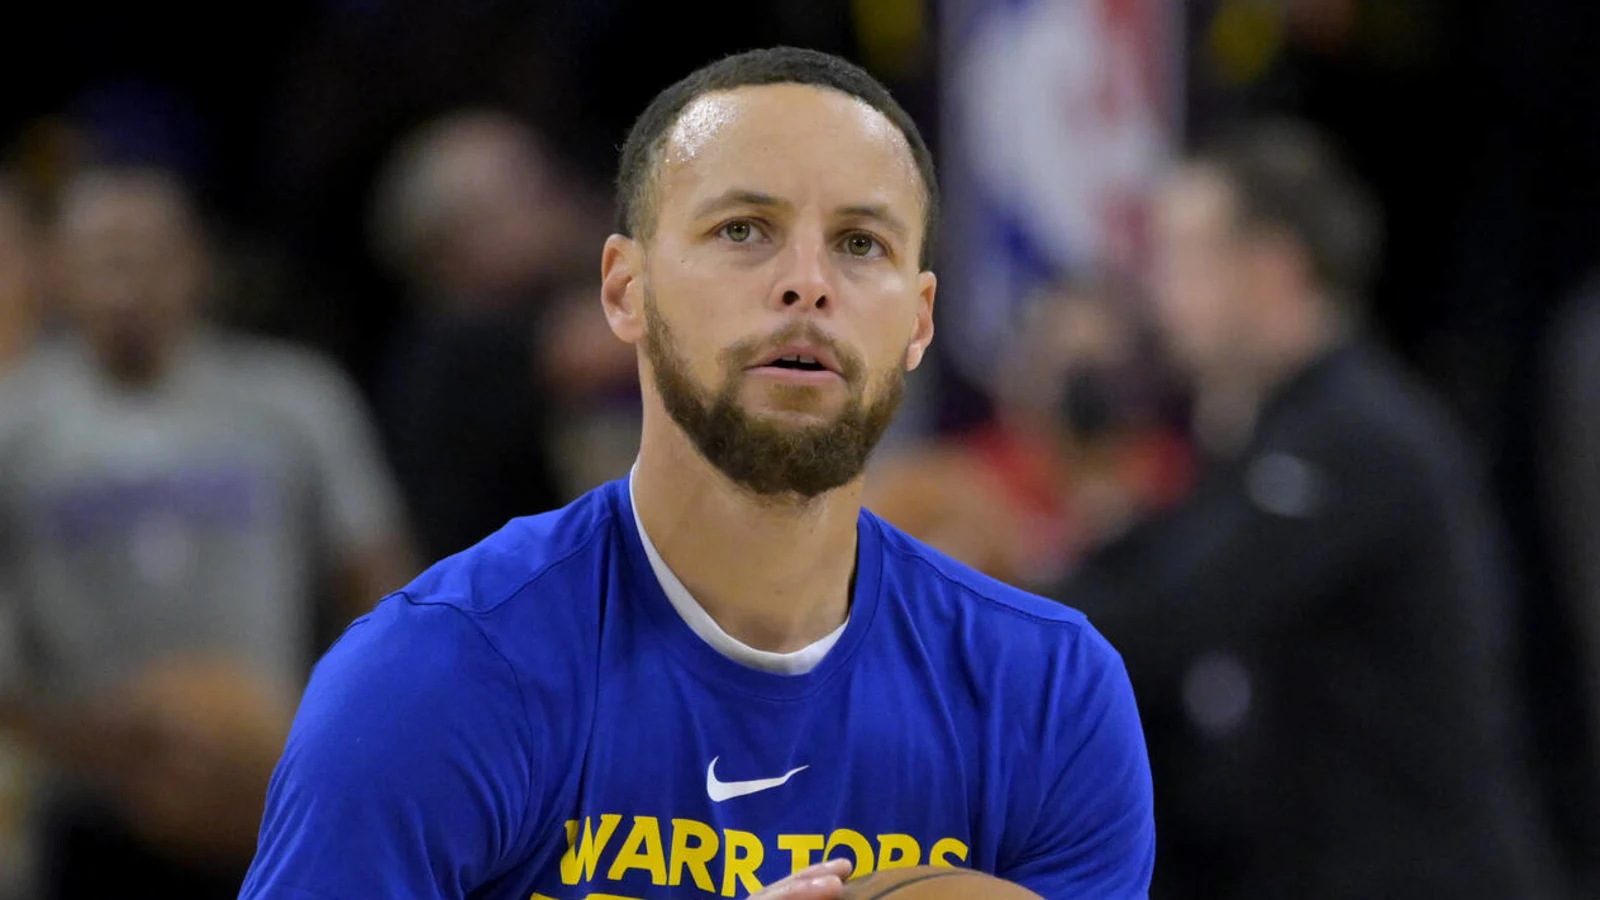 This 1 Insane Stat Compares Stephen Curry To Michael Jordan